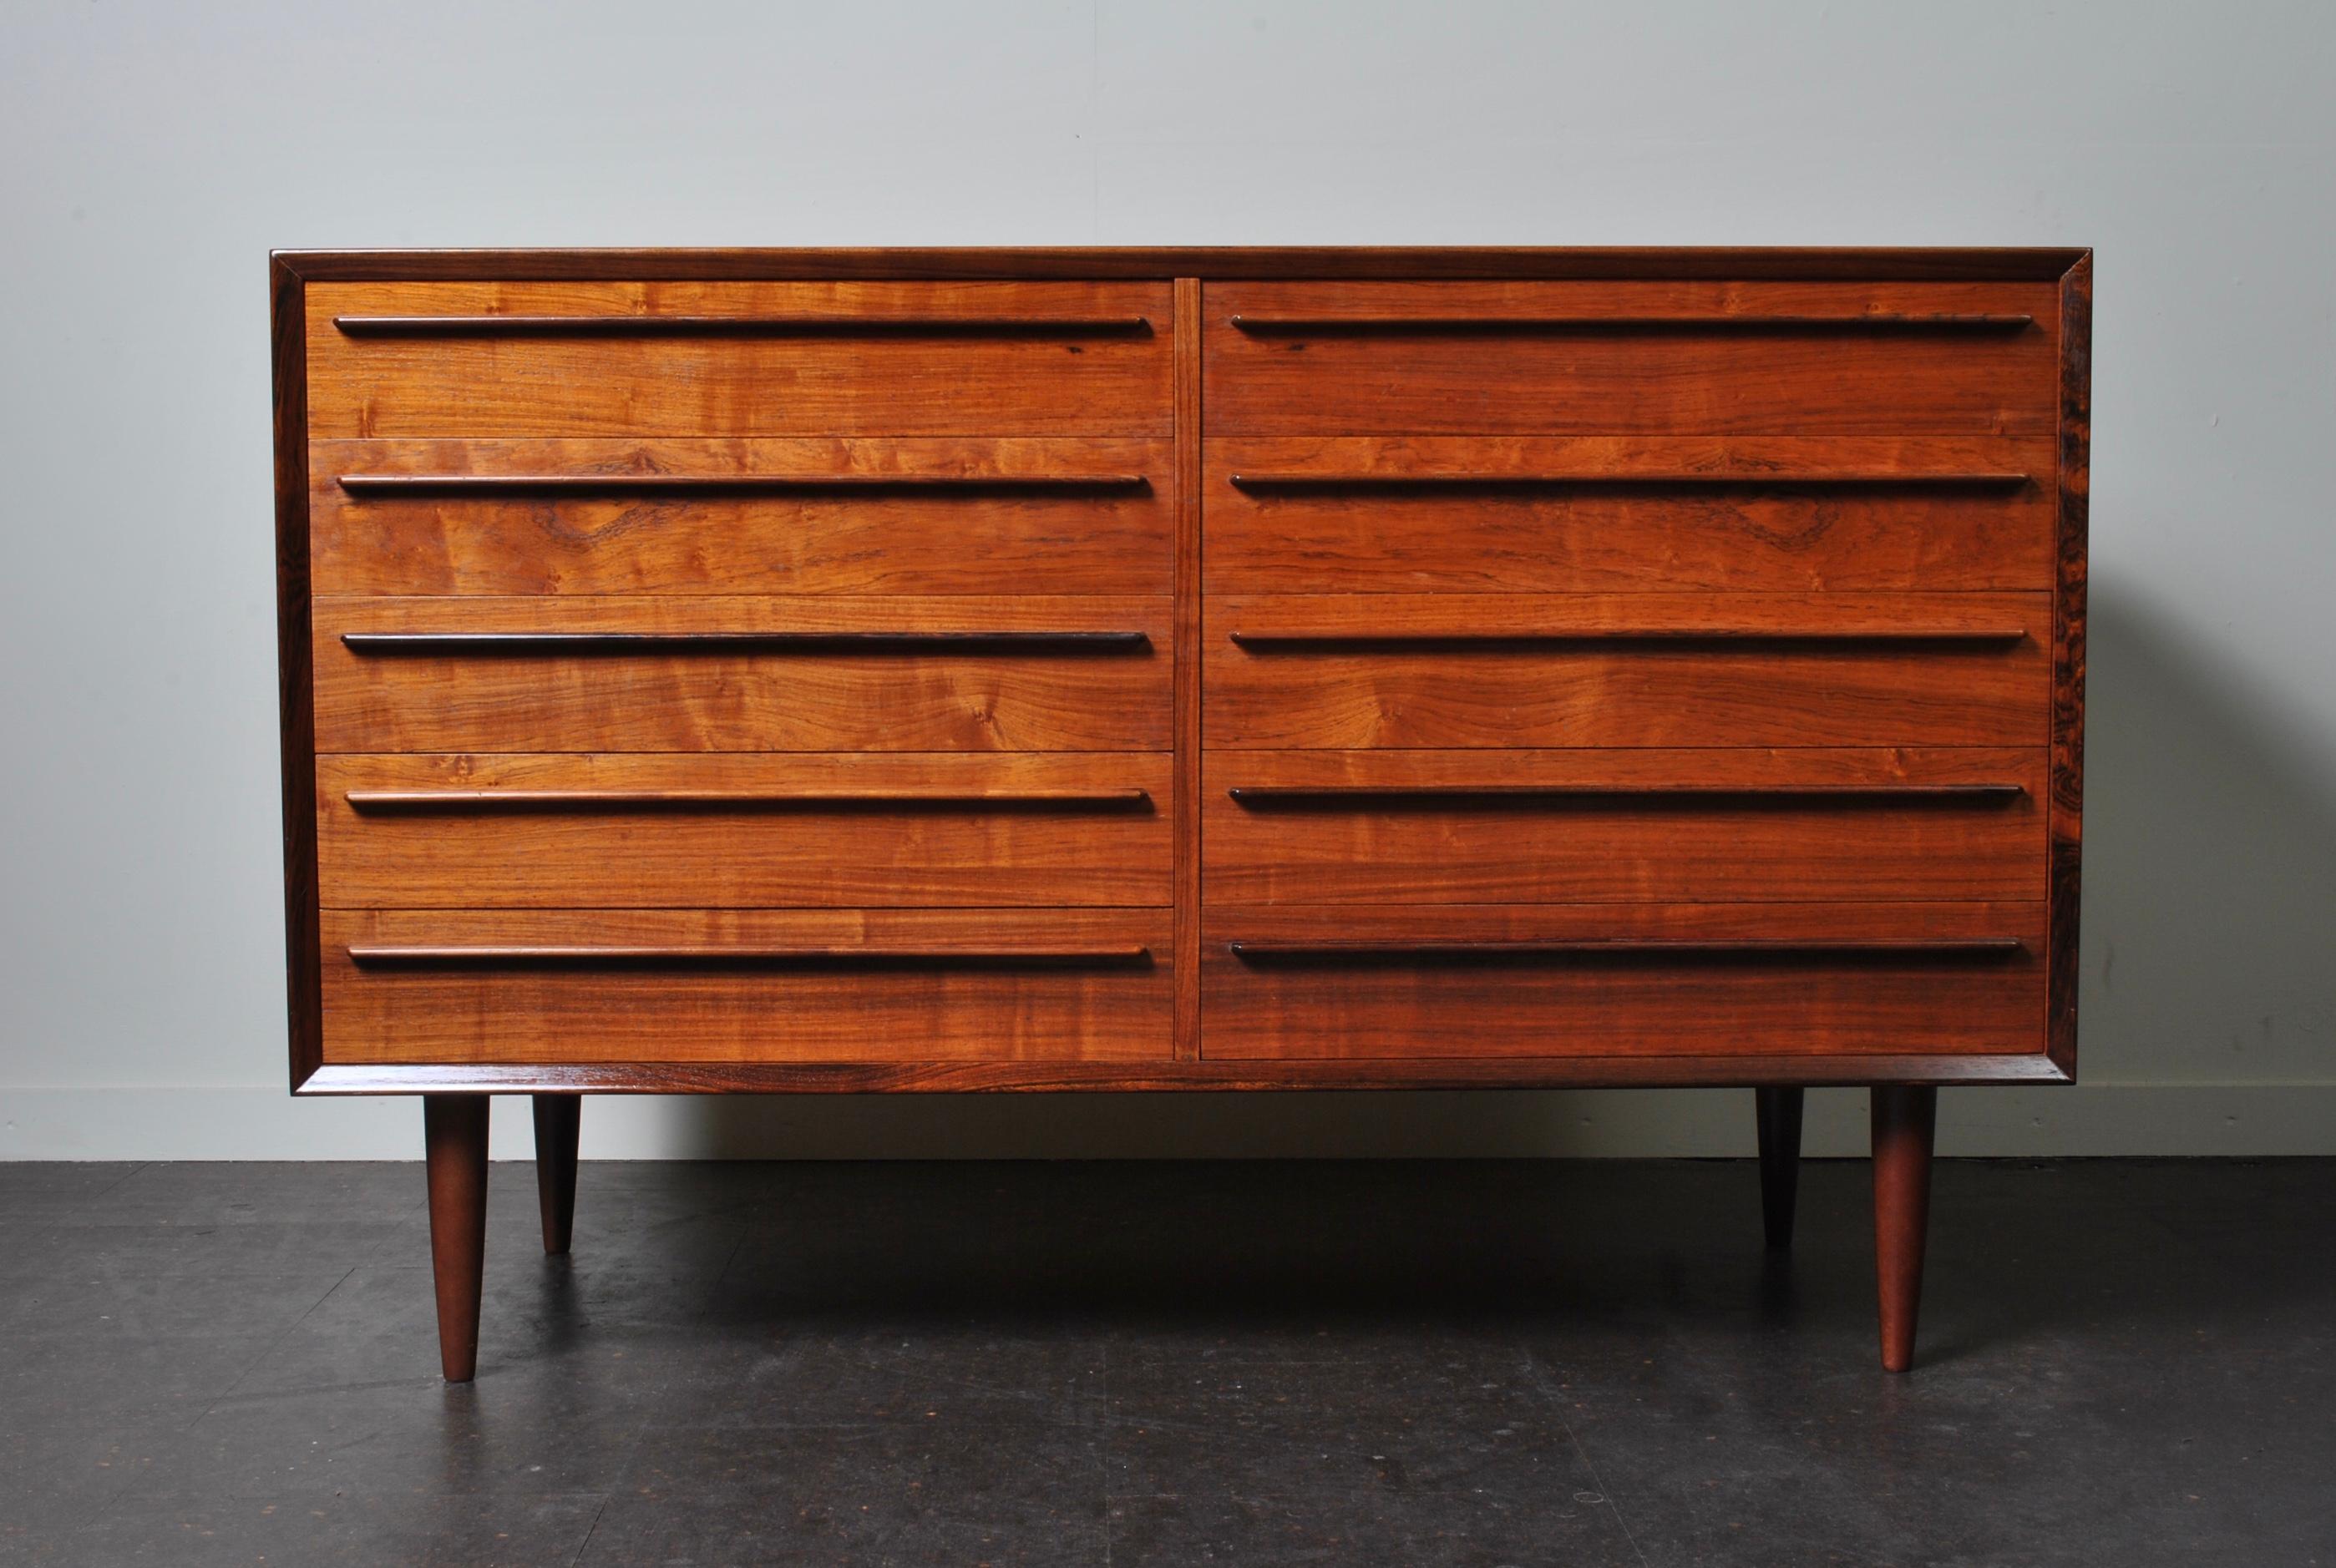 Double bank Danish midcentury rosewood chest of drawers, Denmark, circa 1960.